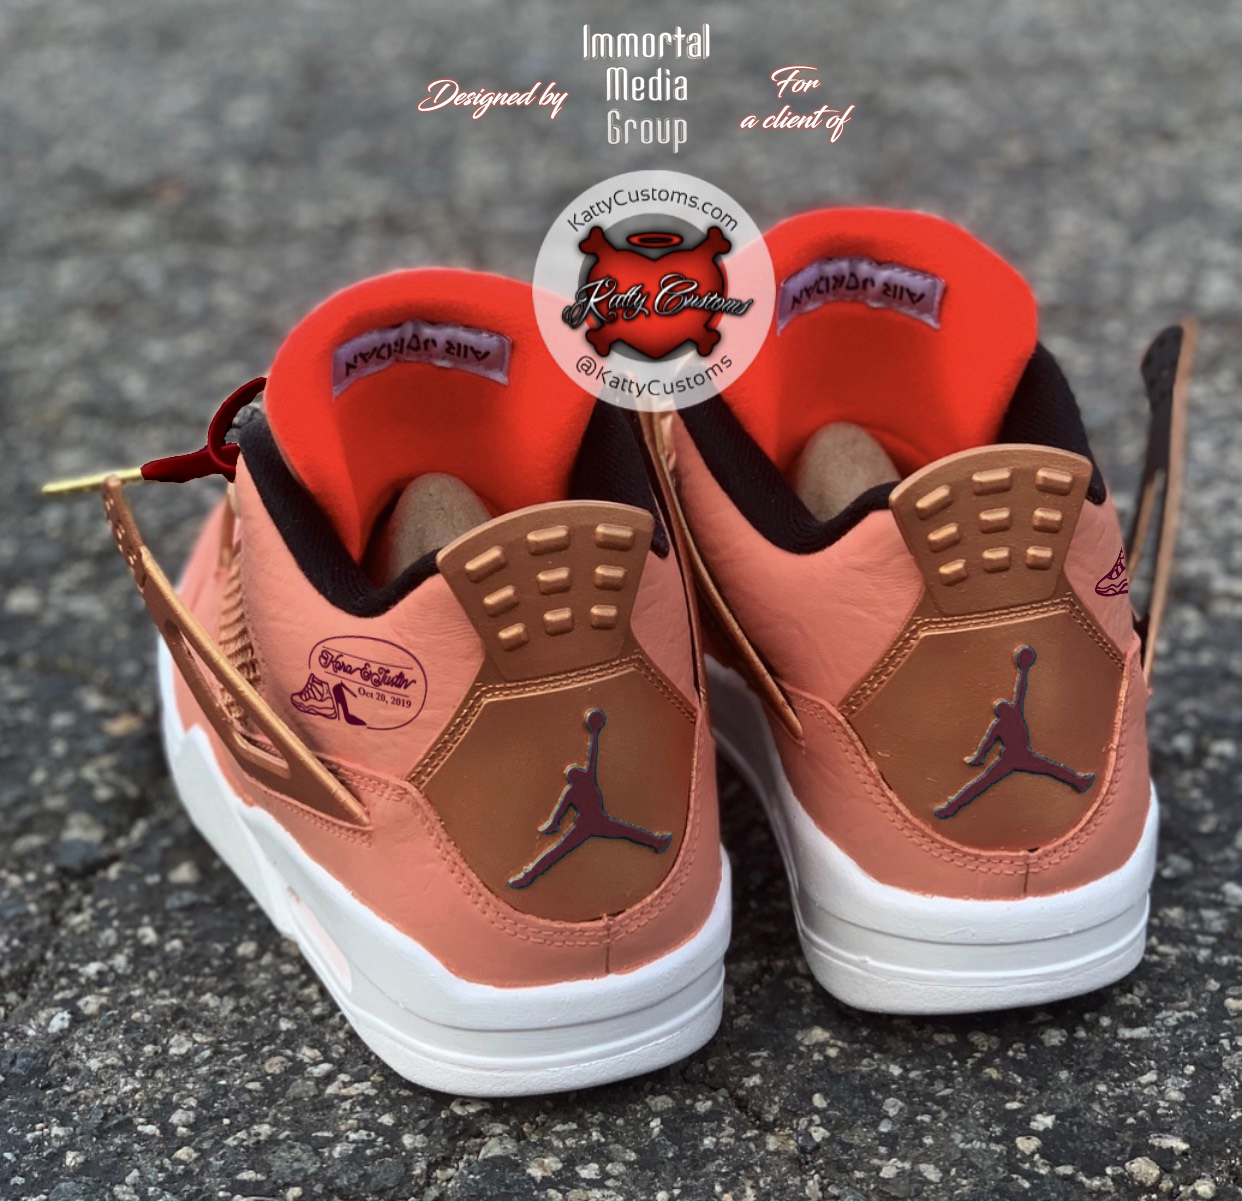 Katty Customs on X: “Raging Bull” 🔥 Customized Air Jordan XI + Custom Red  Leather Laces 🔴 Custom Made To Any Size! AVAILABLE NOW:   #KattyCustoms #Customs #CustomKicks #CustomShoes  #CustomJordans #LeatherLaces #SneakerHea